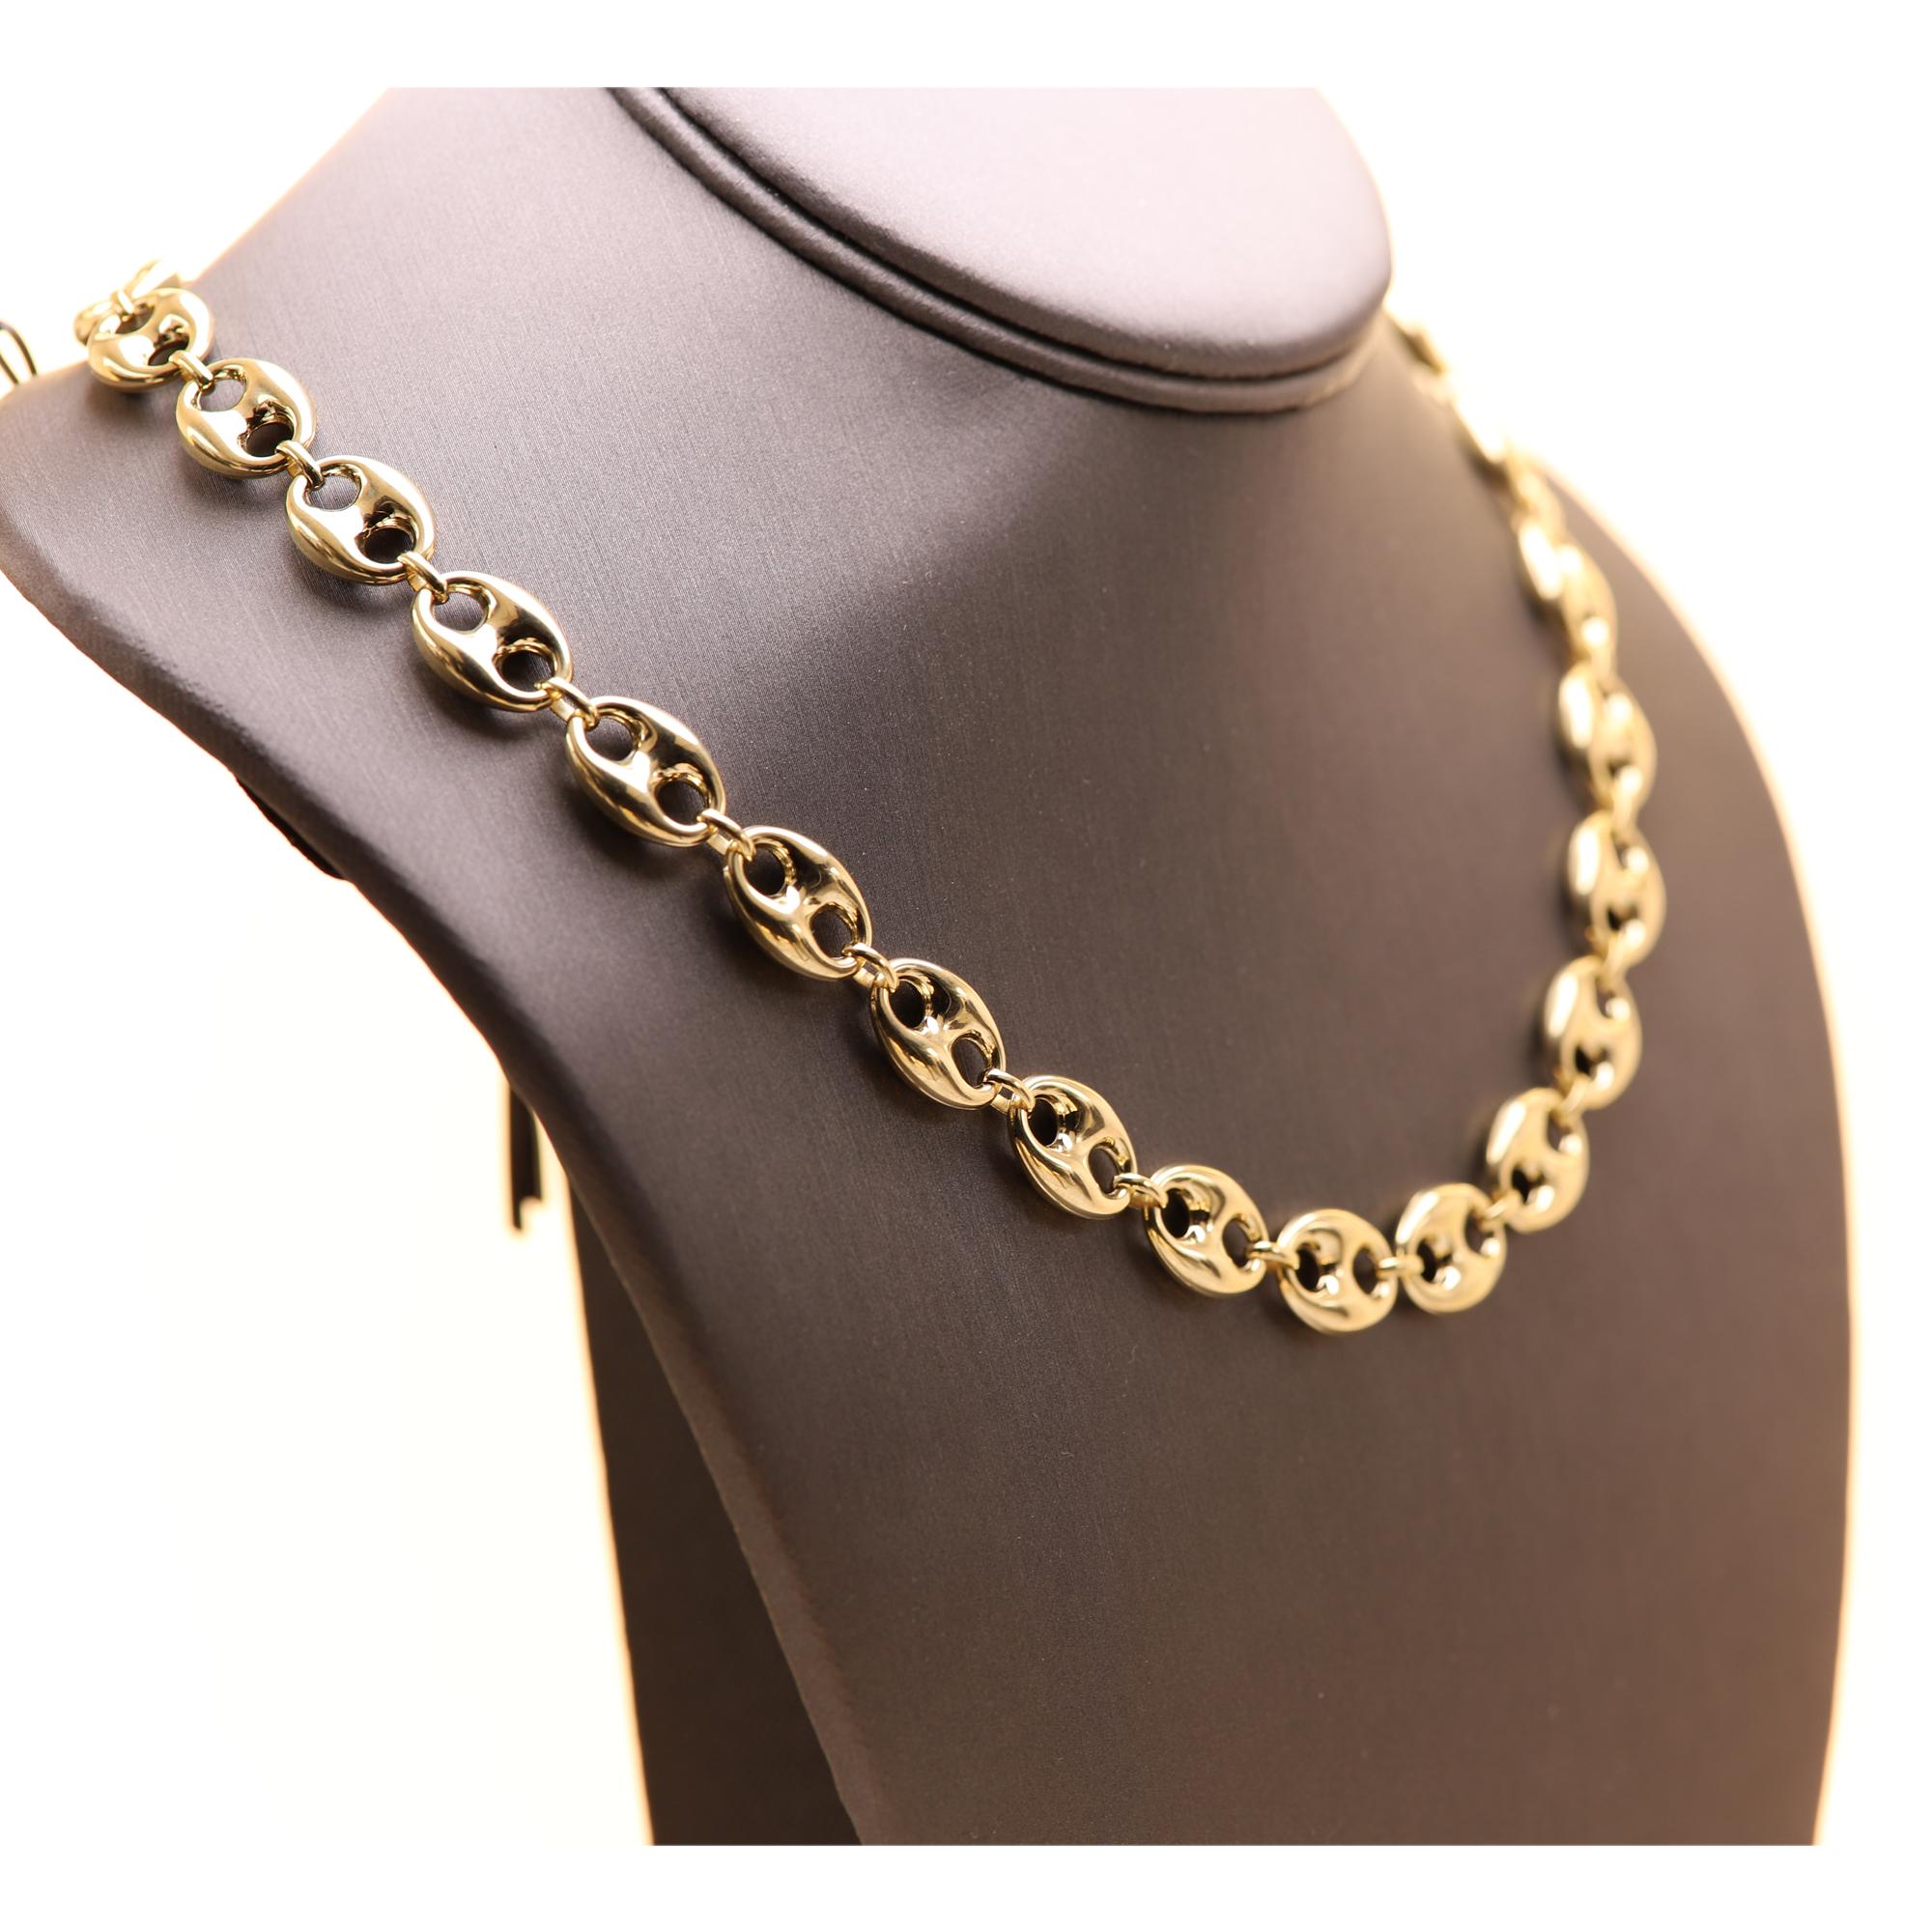 Women's or Men's Puffed Anchor Italian Gold Necklace Chain Mariner Link Chain Solid 14 Karat Gold